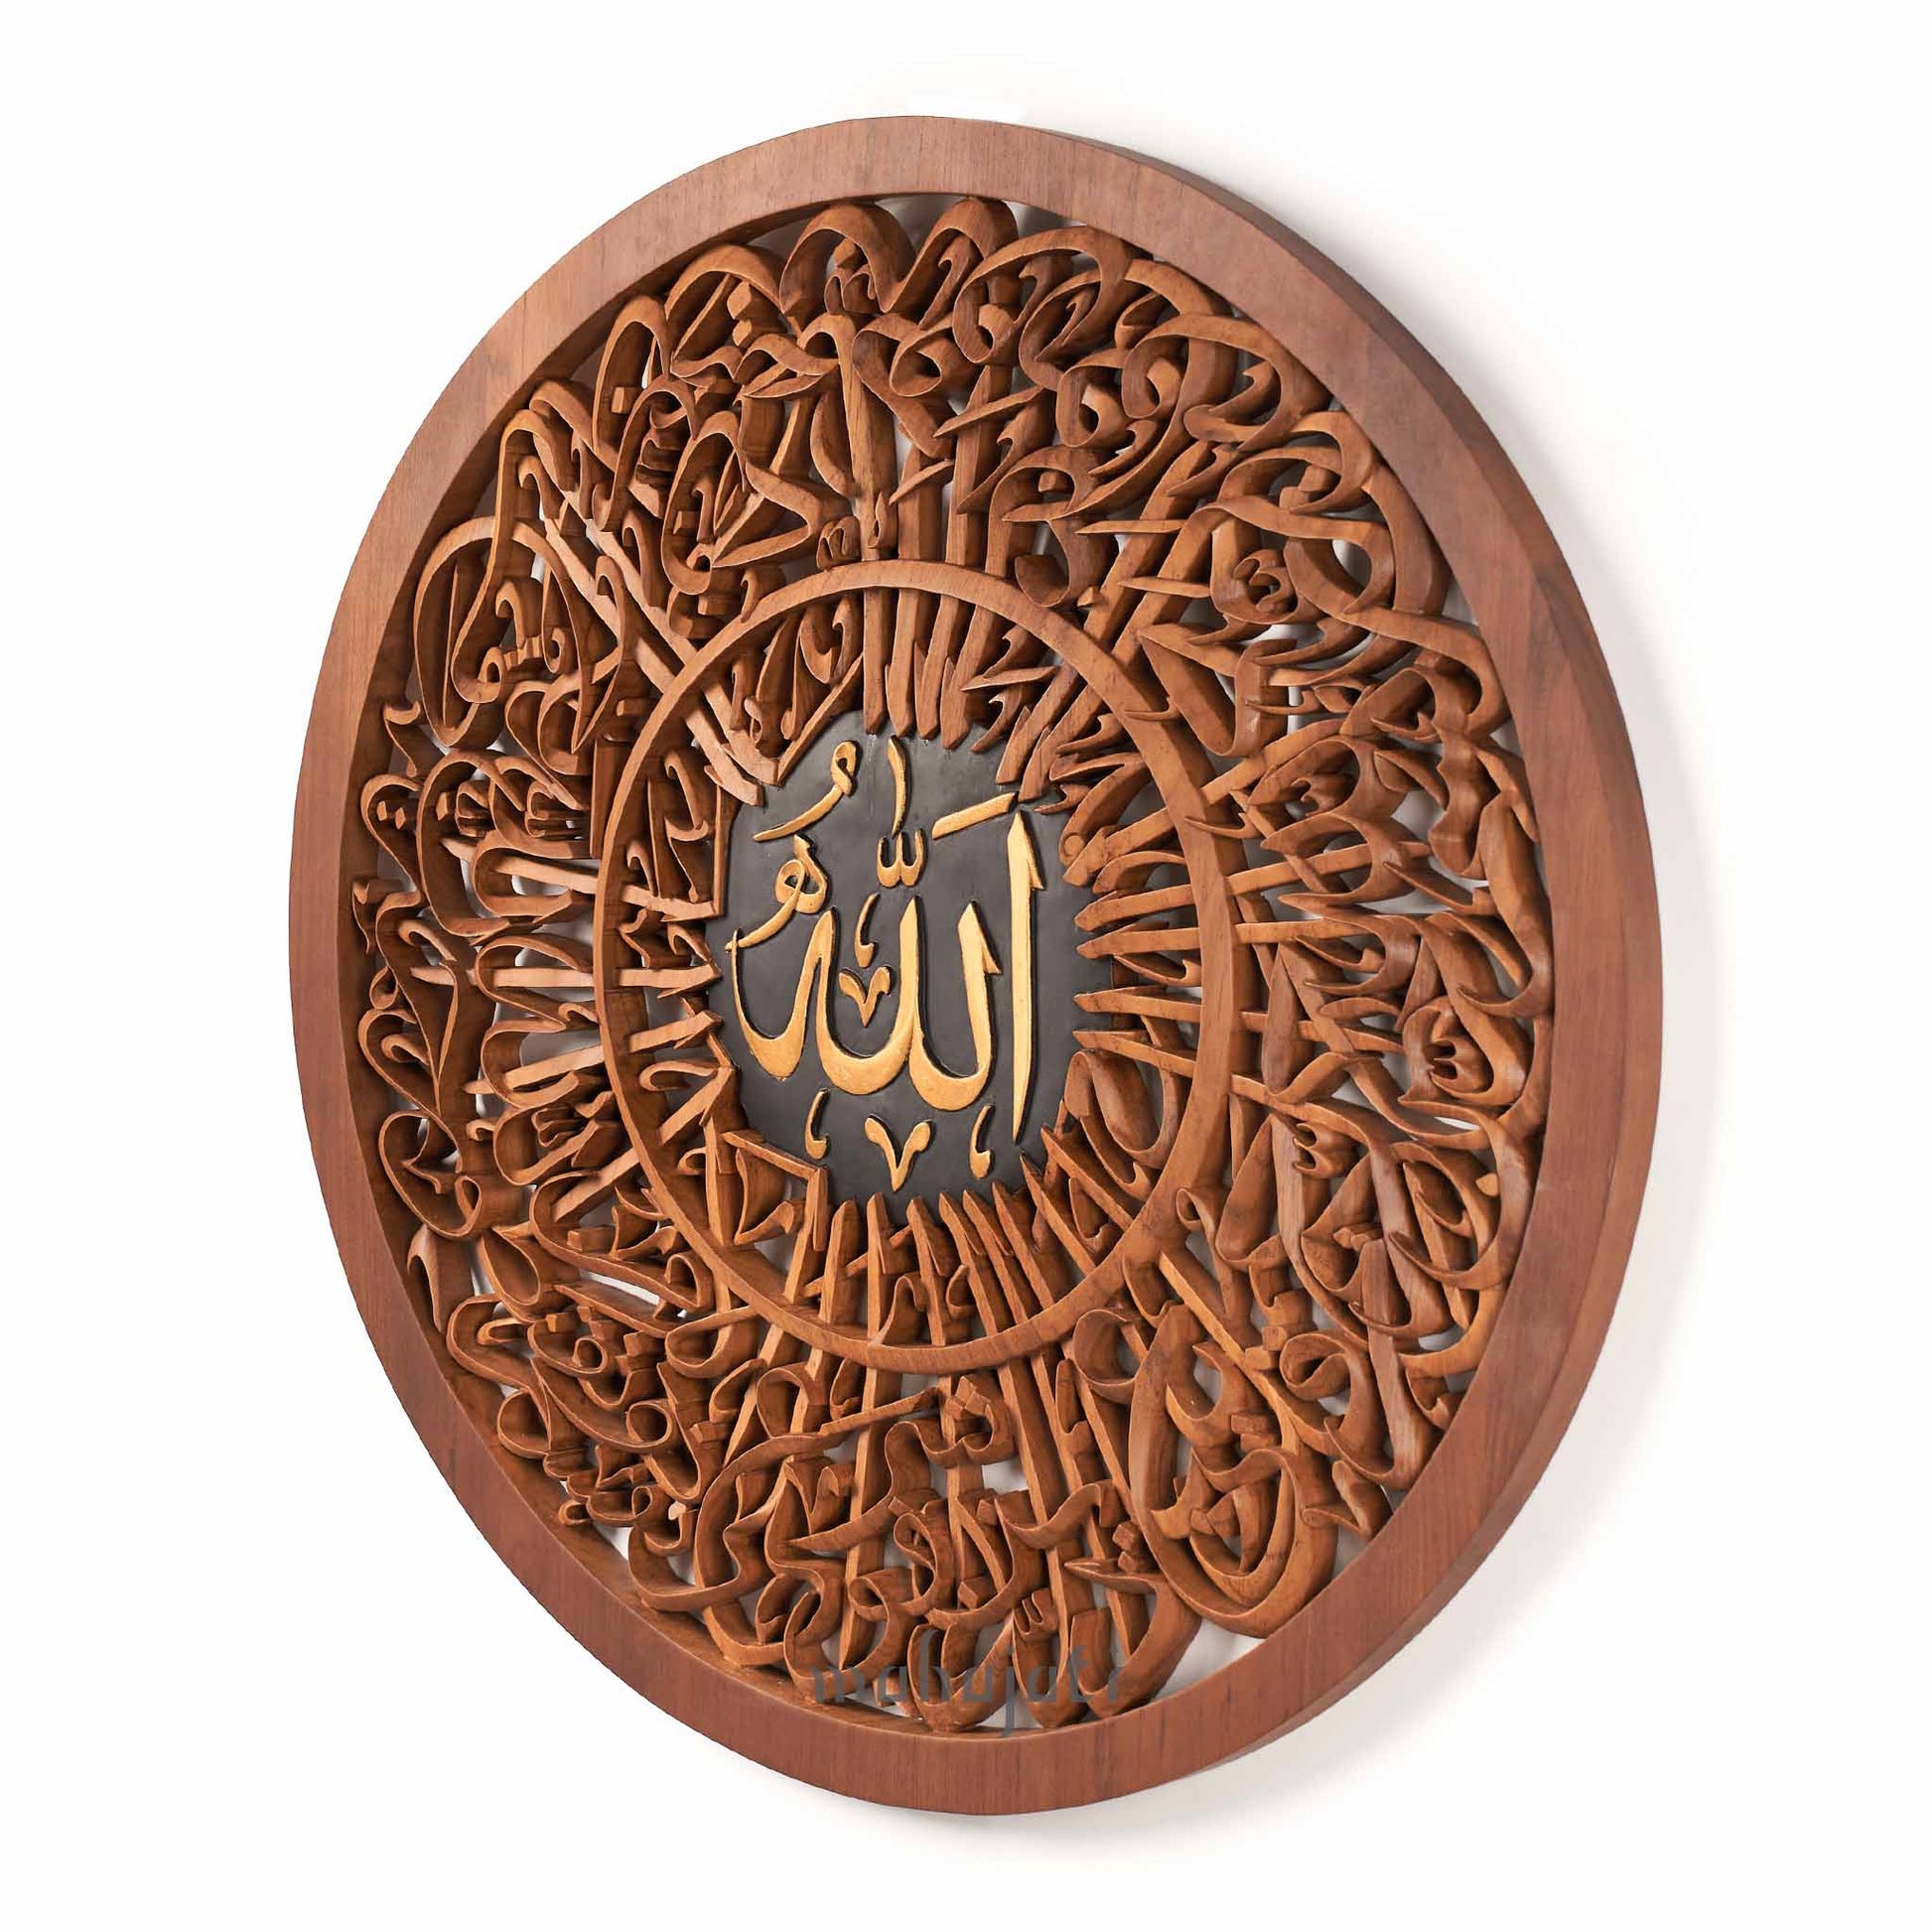 Calligraphy wood carving wall art